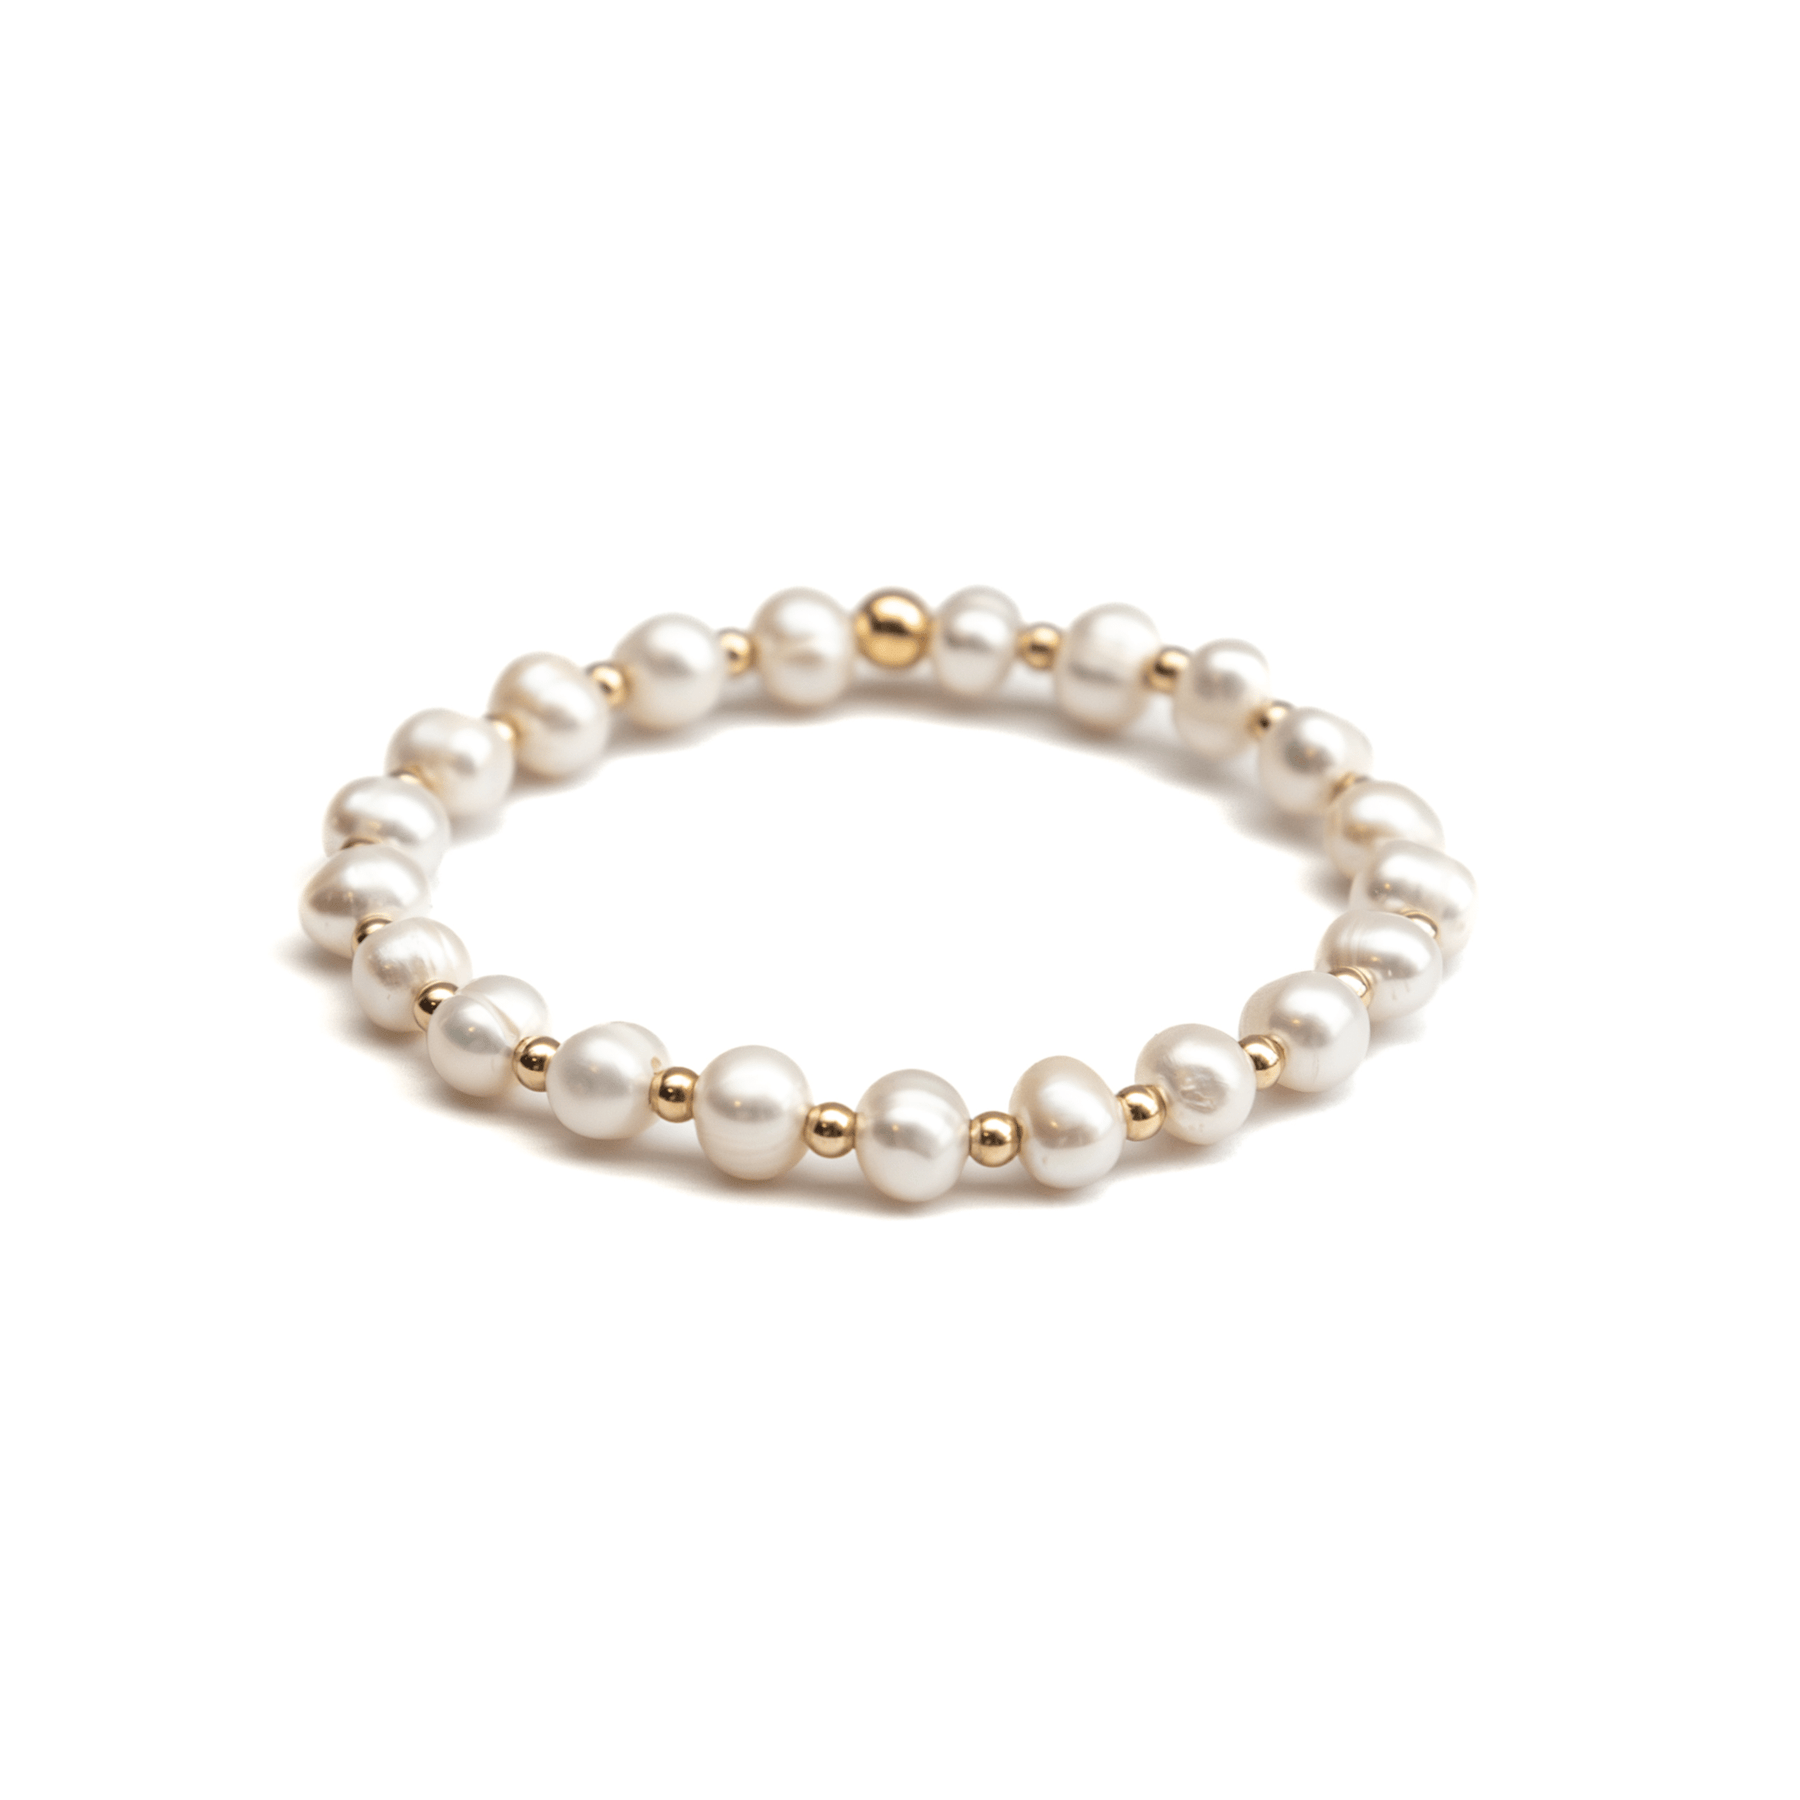 Ball Bracelet With Pearls